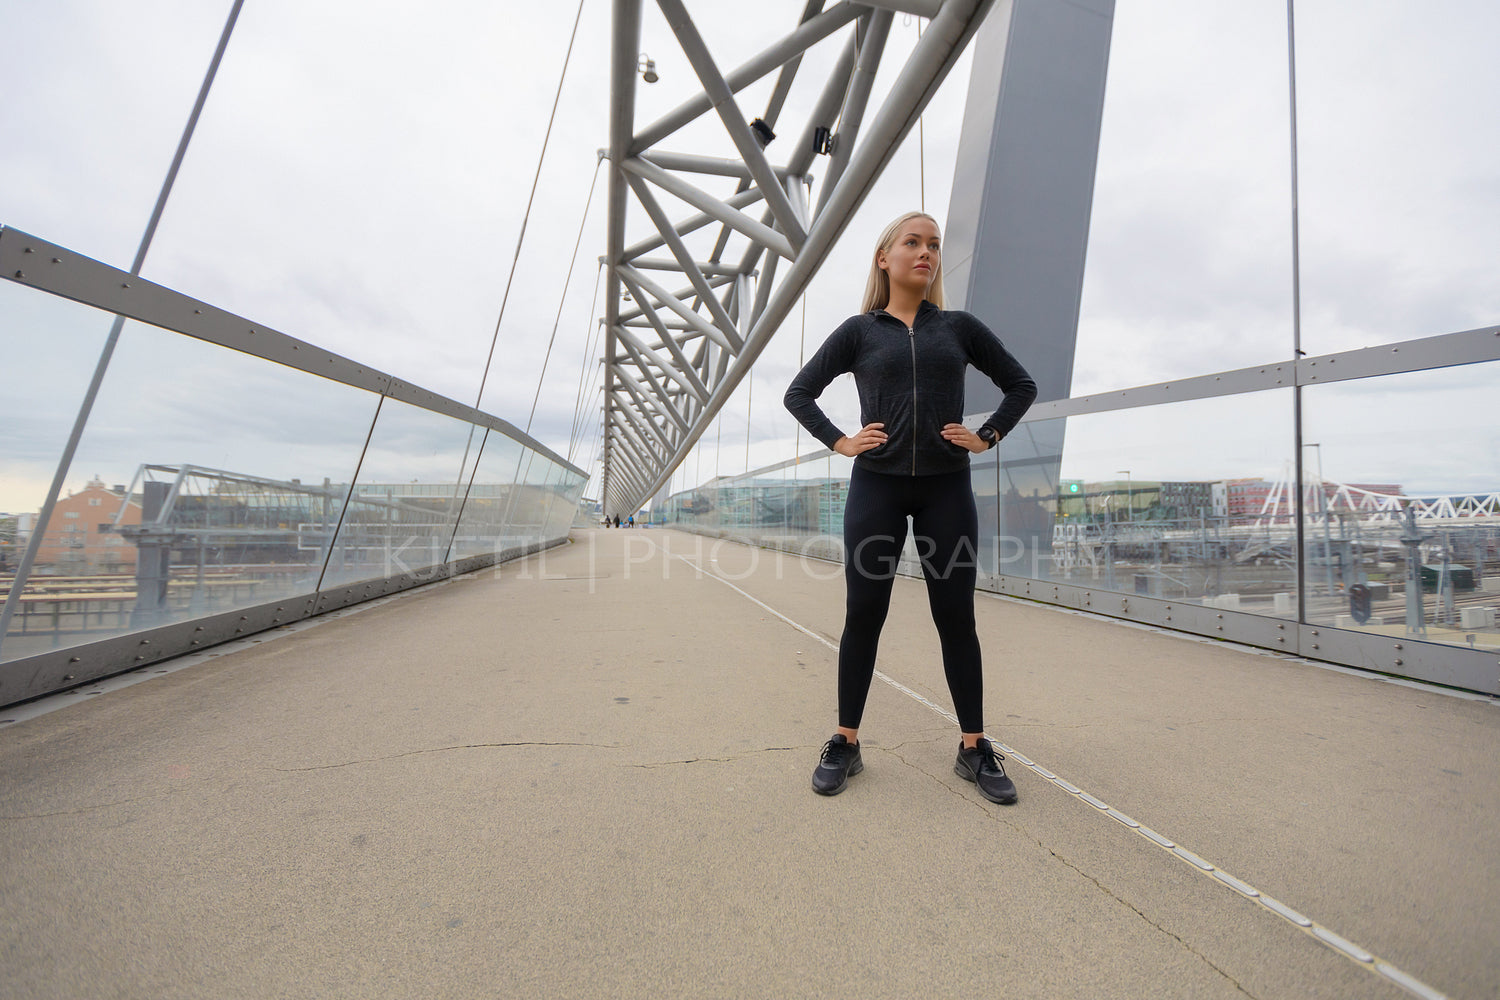 Confident Woman with Hands on the Hips in Workout Outfit Standing on Bridge